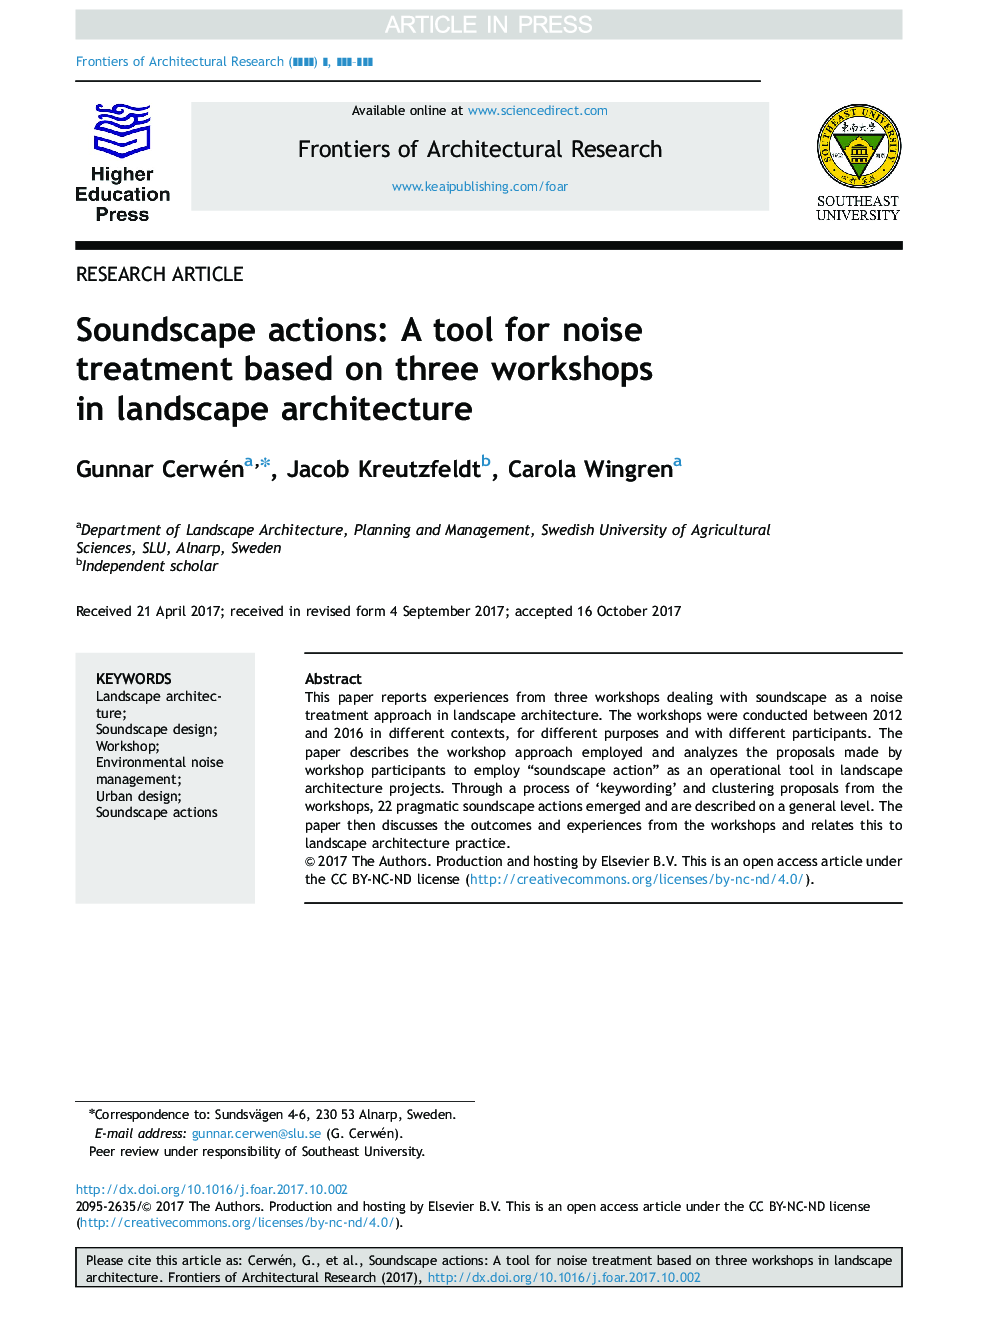 Soundscape actions: A tool for noise treatment based on three workshops in landscape architecture